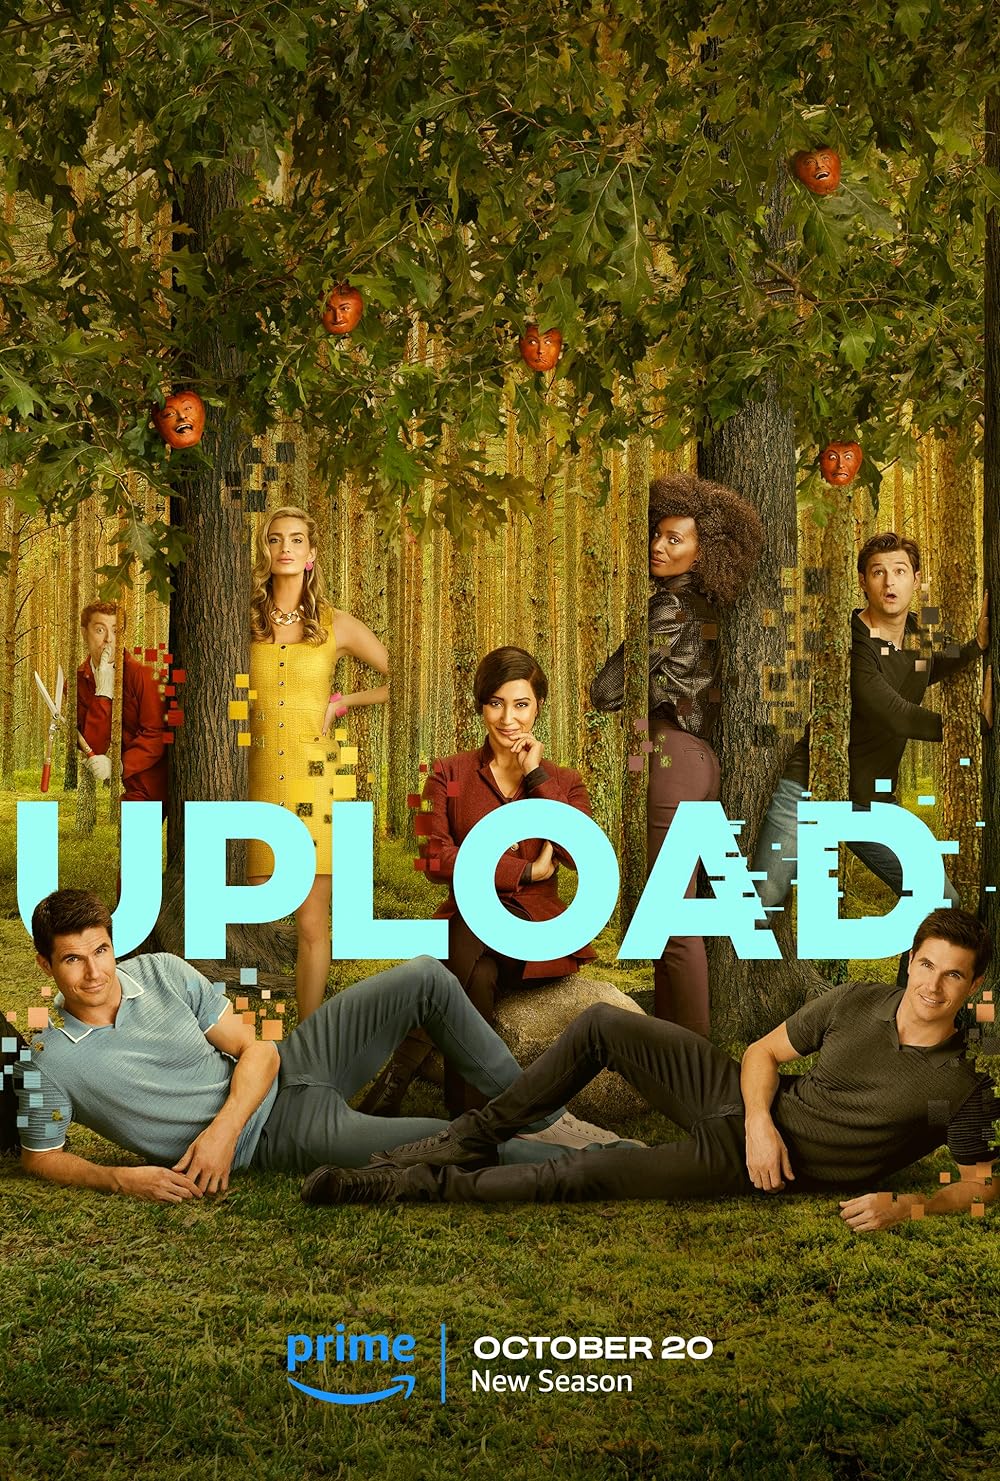 Promotional image for the Amazon Prime show "Upload"